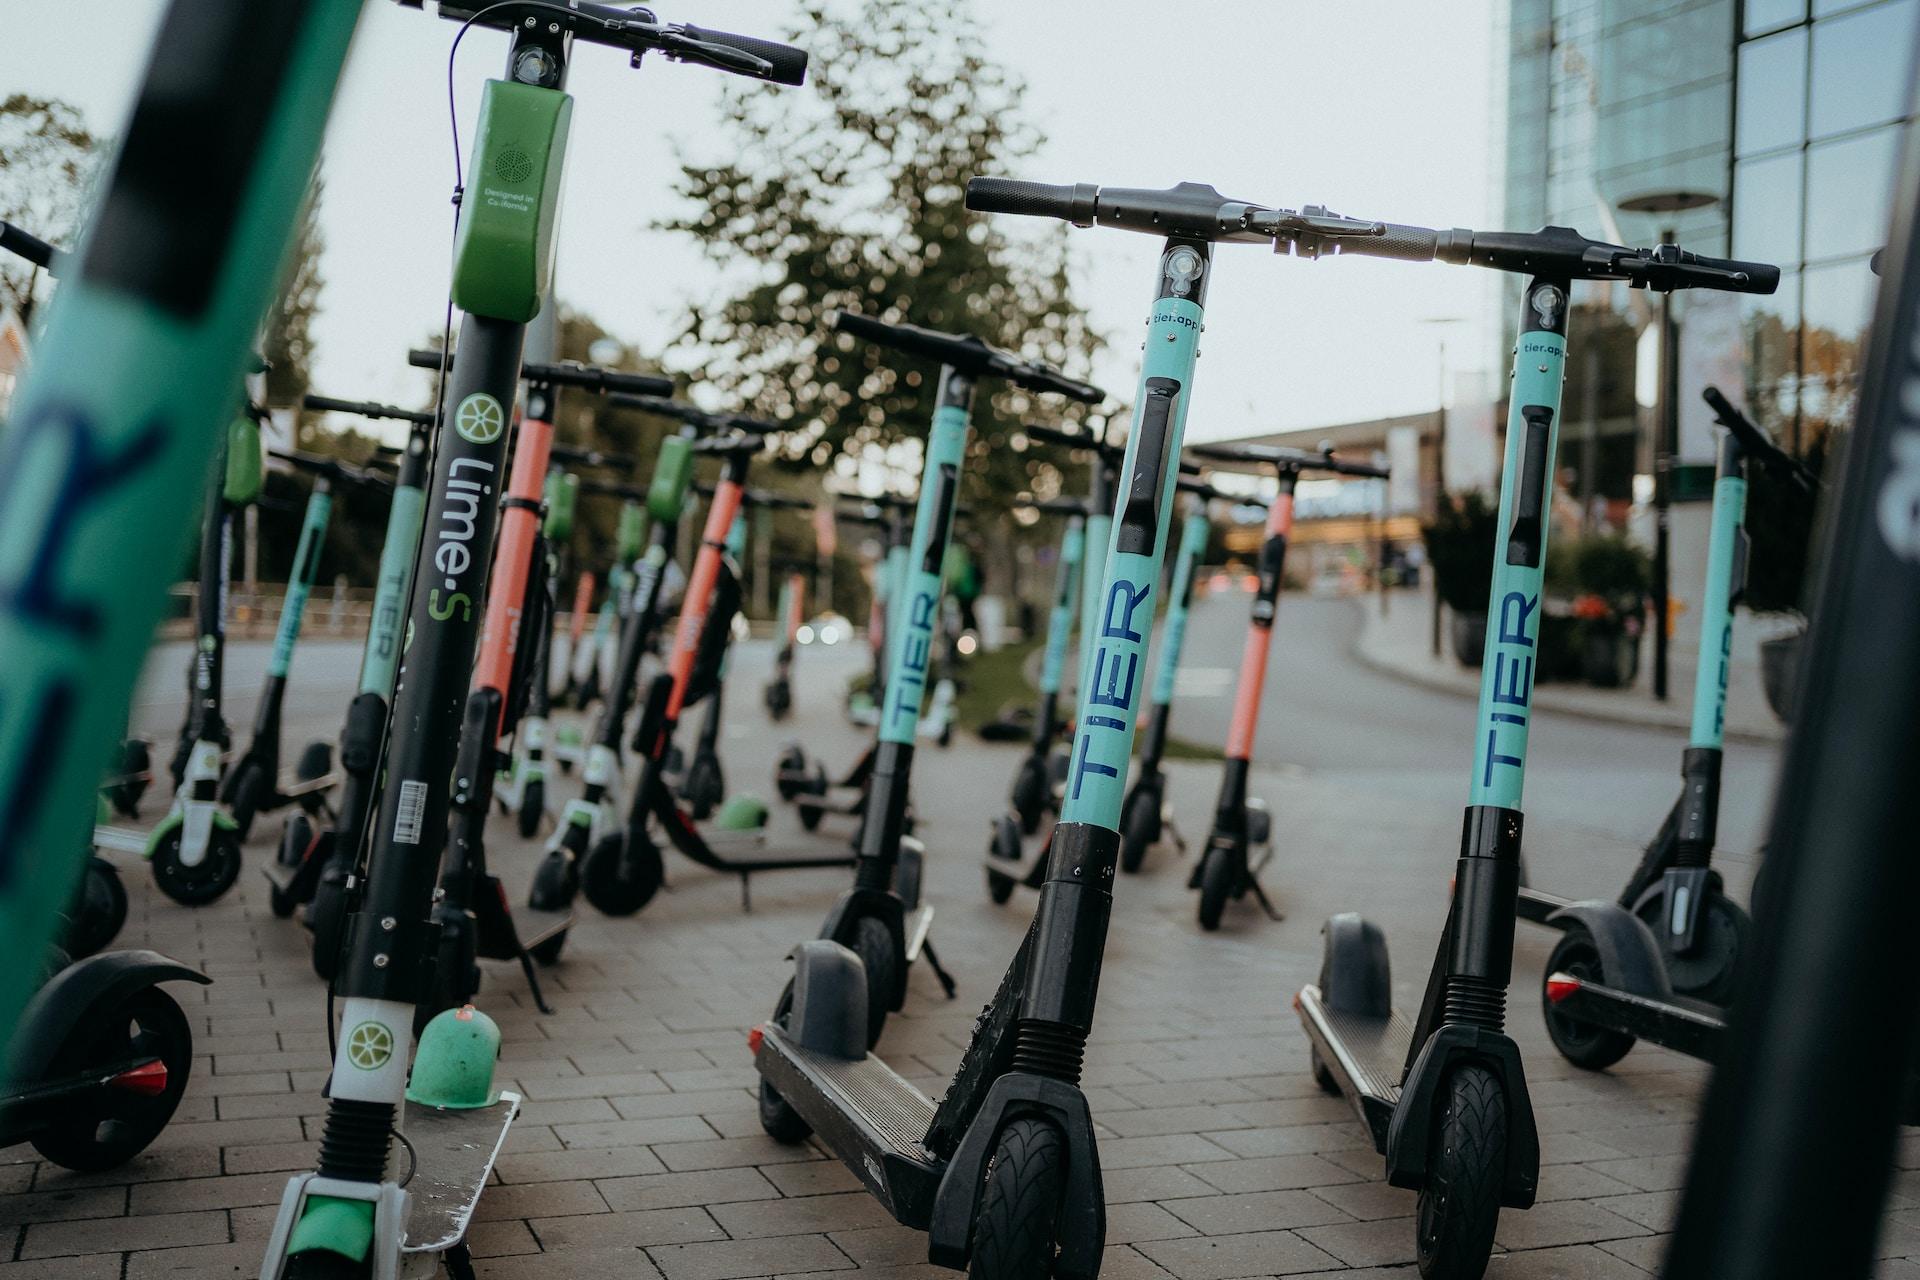 group of electric scooters